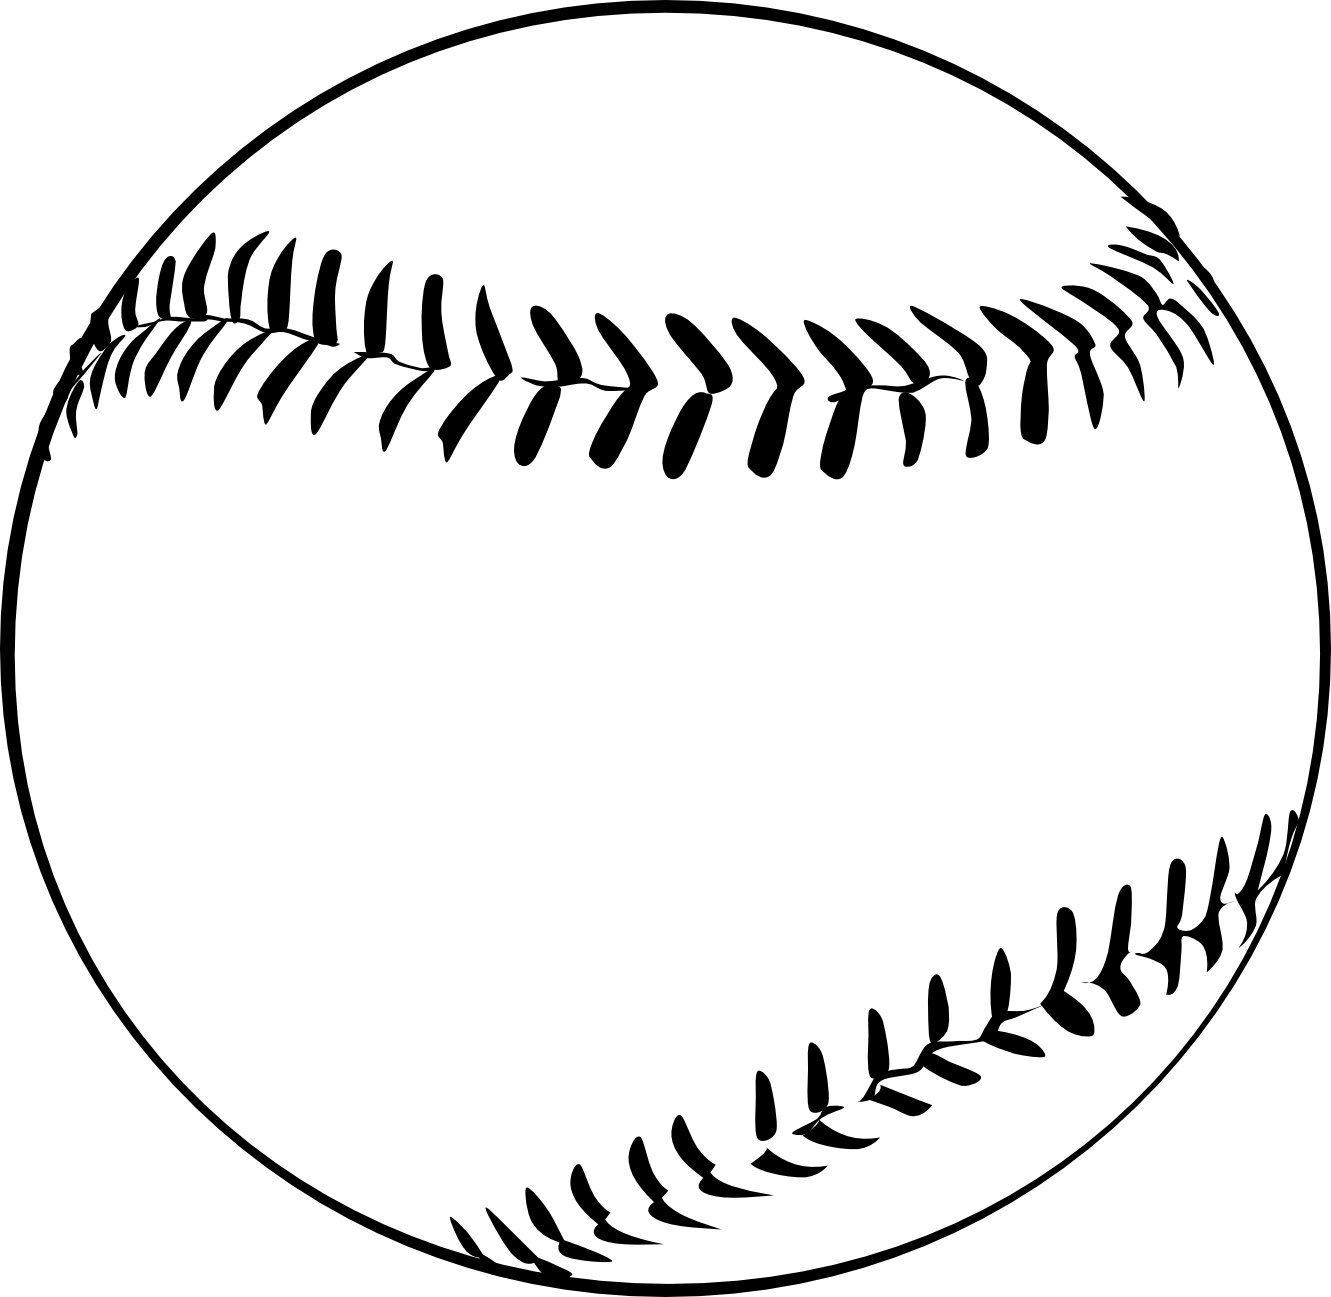 Free baseball clip art images free clipart 3